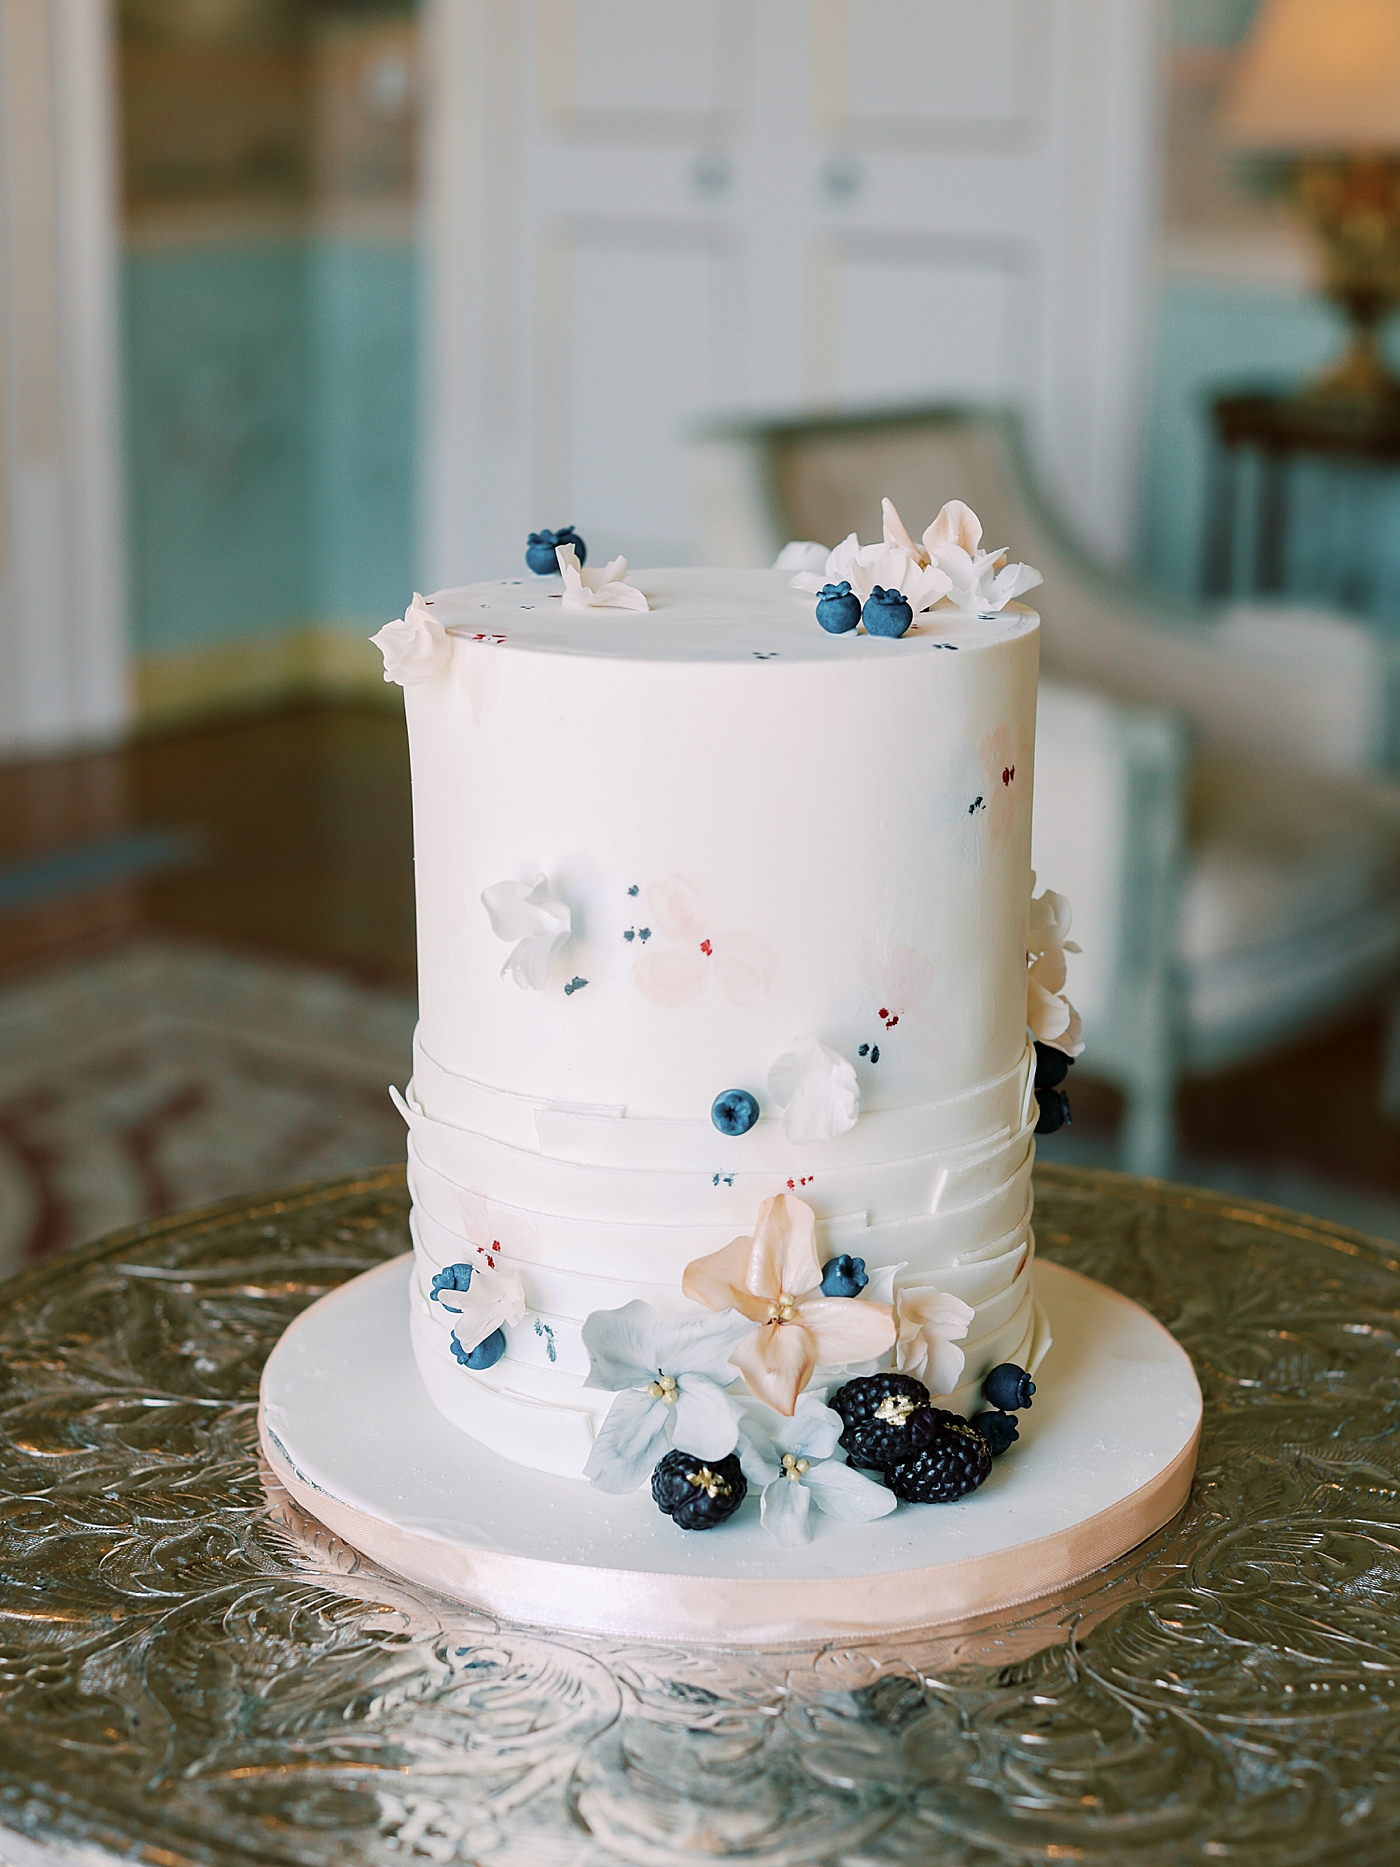 Wedding cake with blackberries and gold foil | Image by Diane Sotero Photography